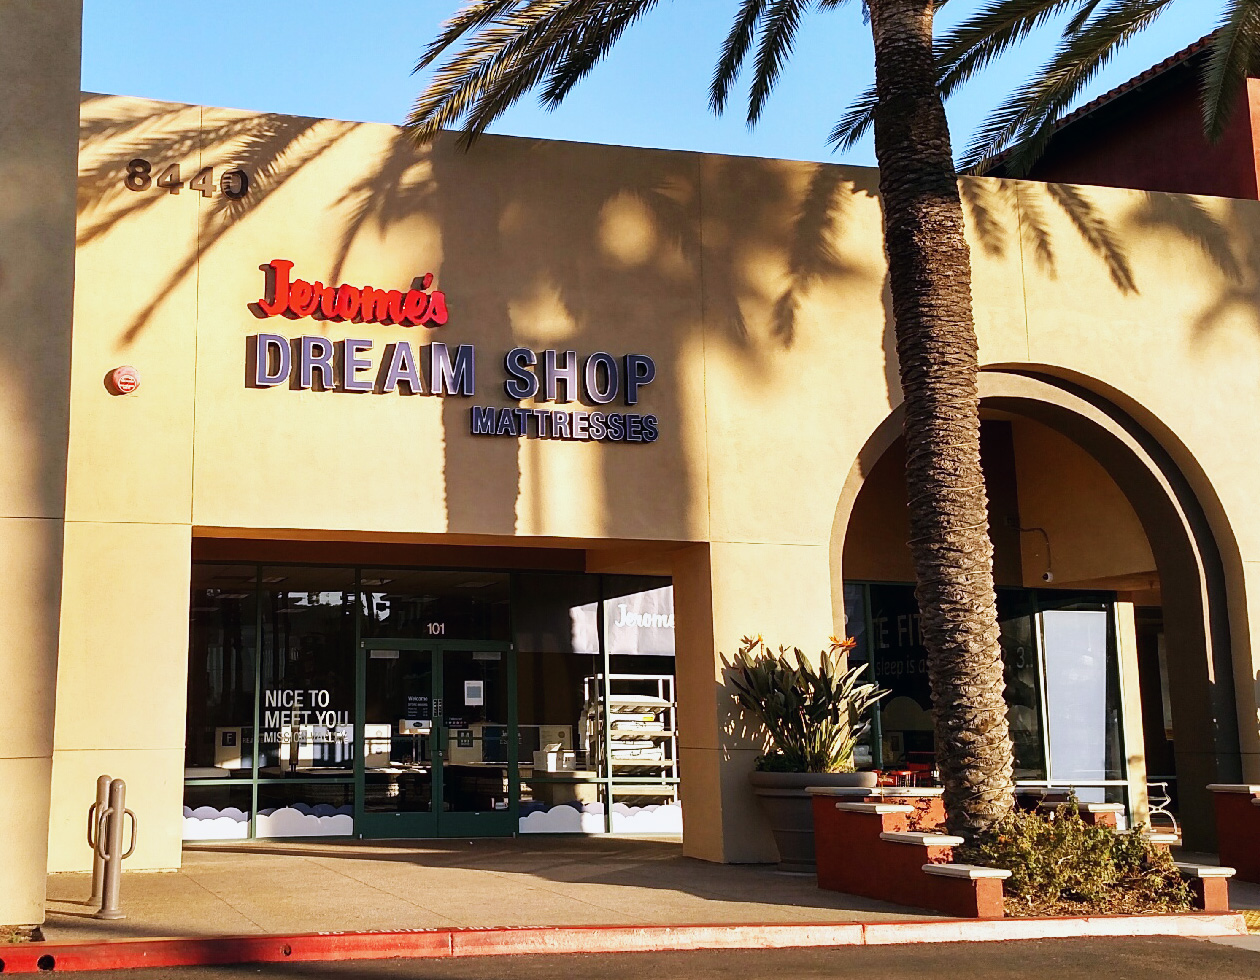 Mission Valley Dream Shop